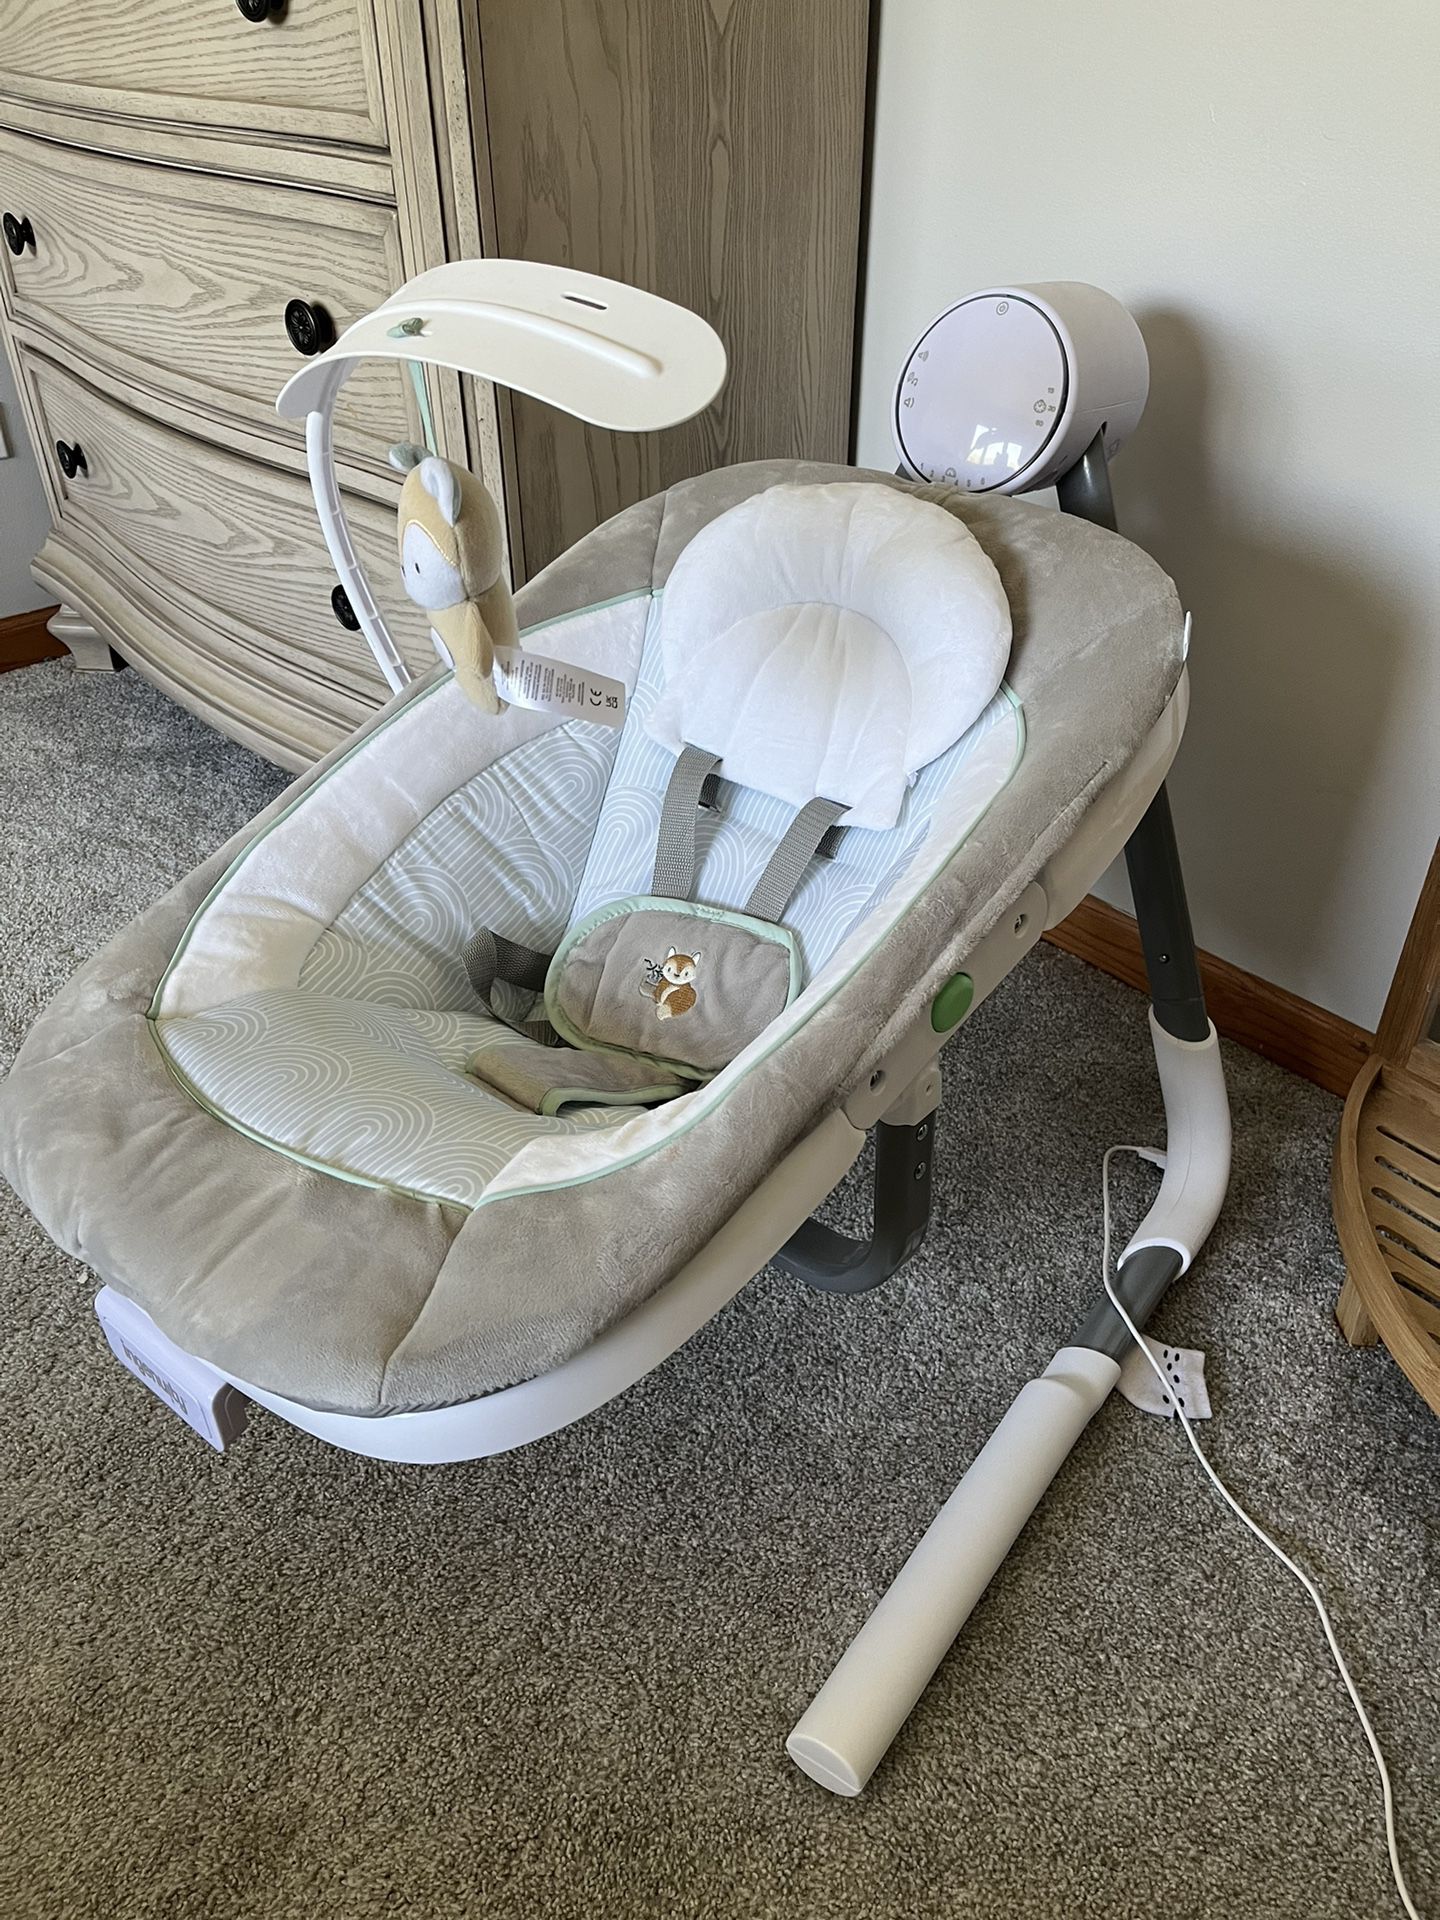 Barely used baby Swing 